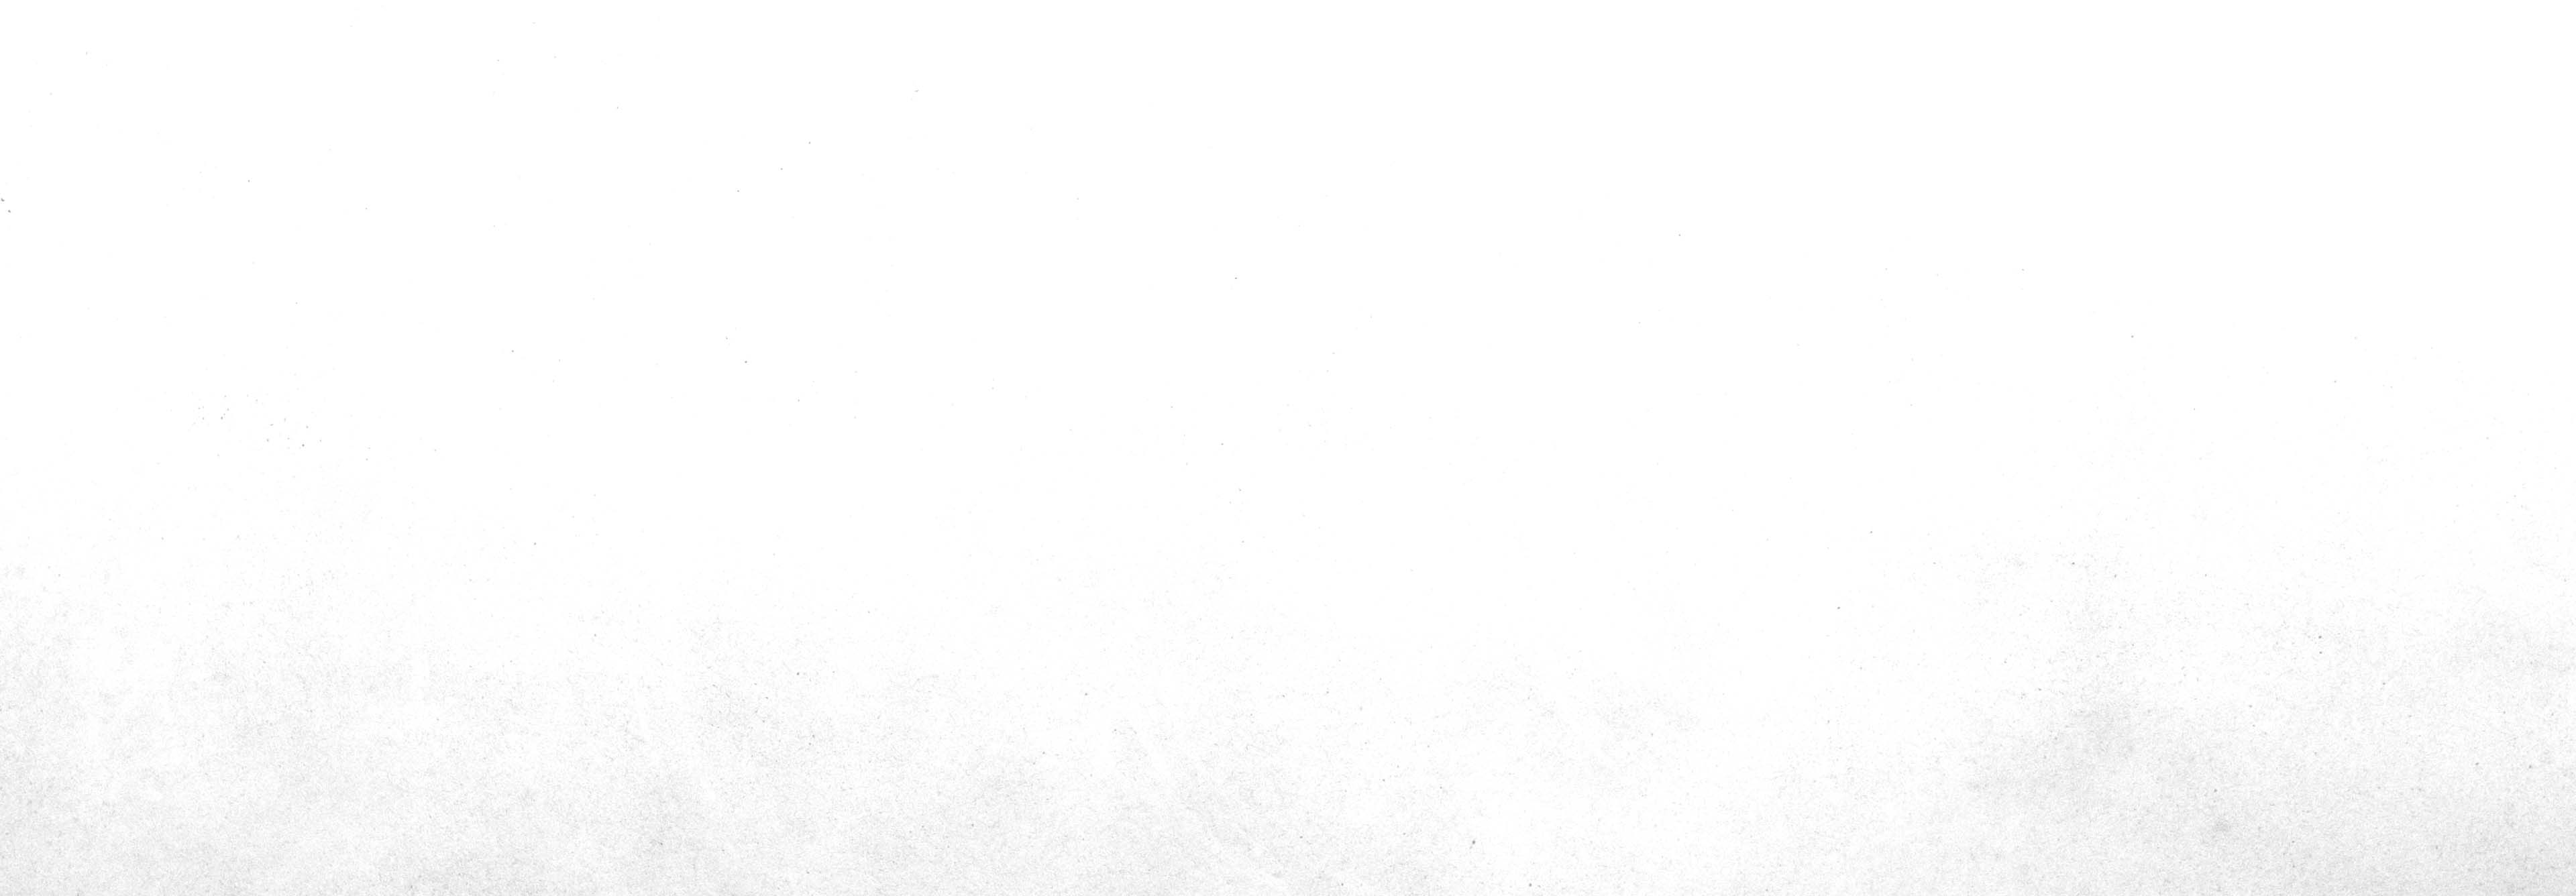 A light colored grey background texture.